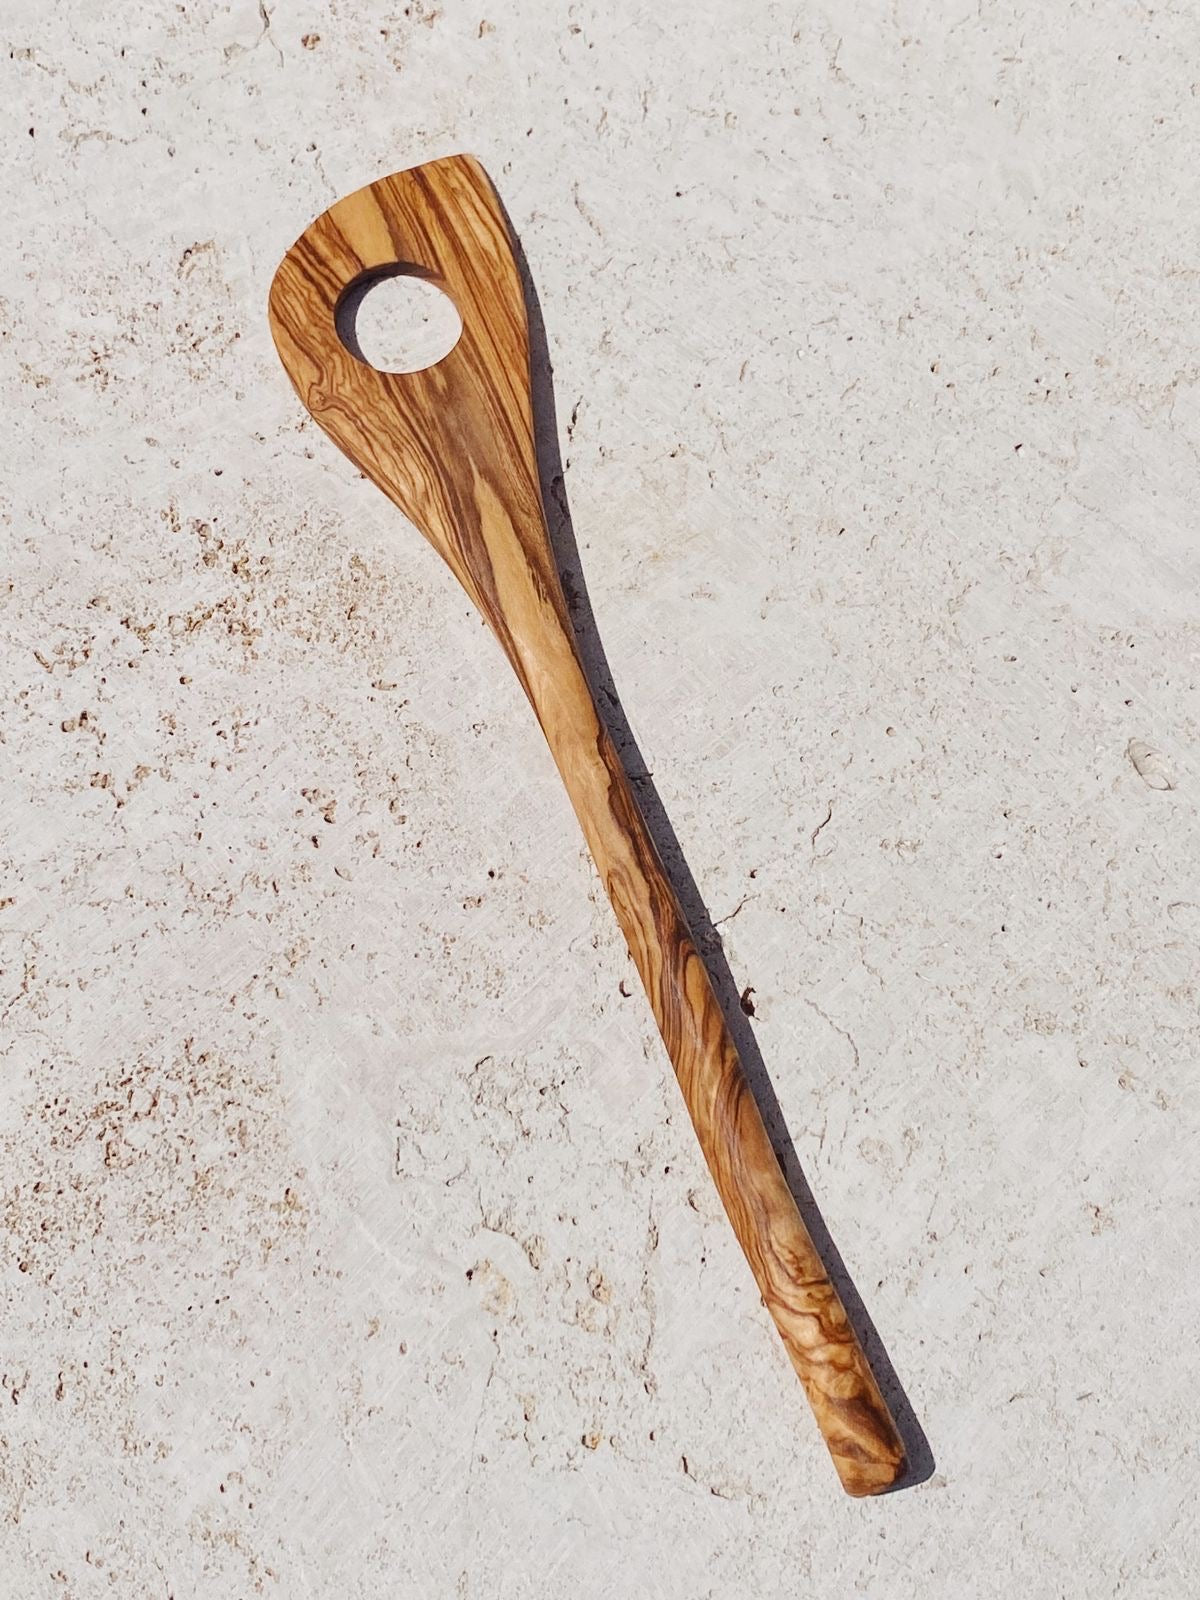 olive wood cooking utensil